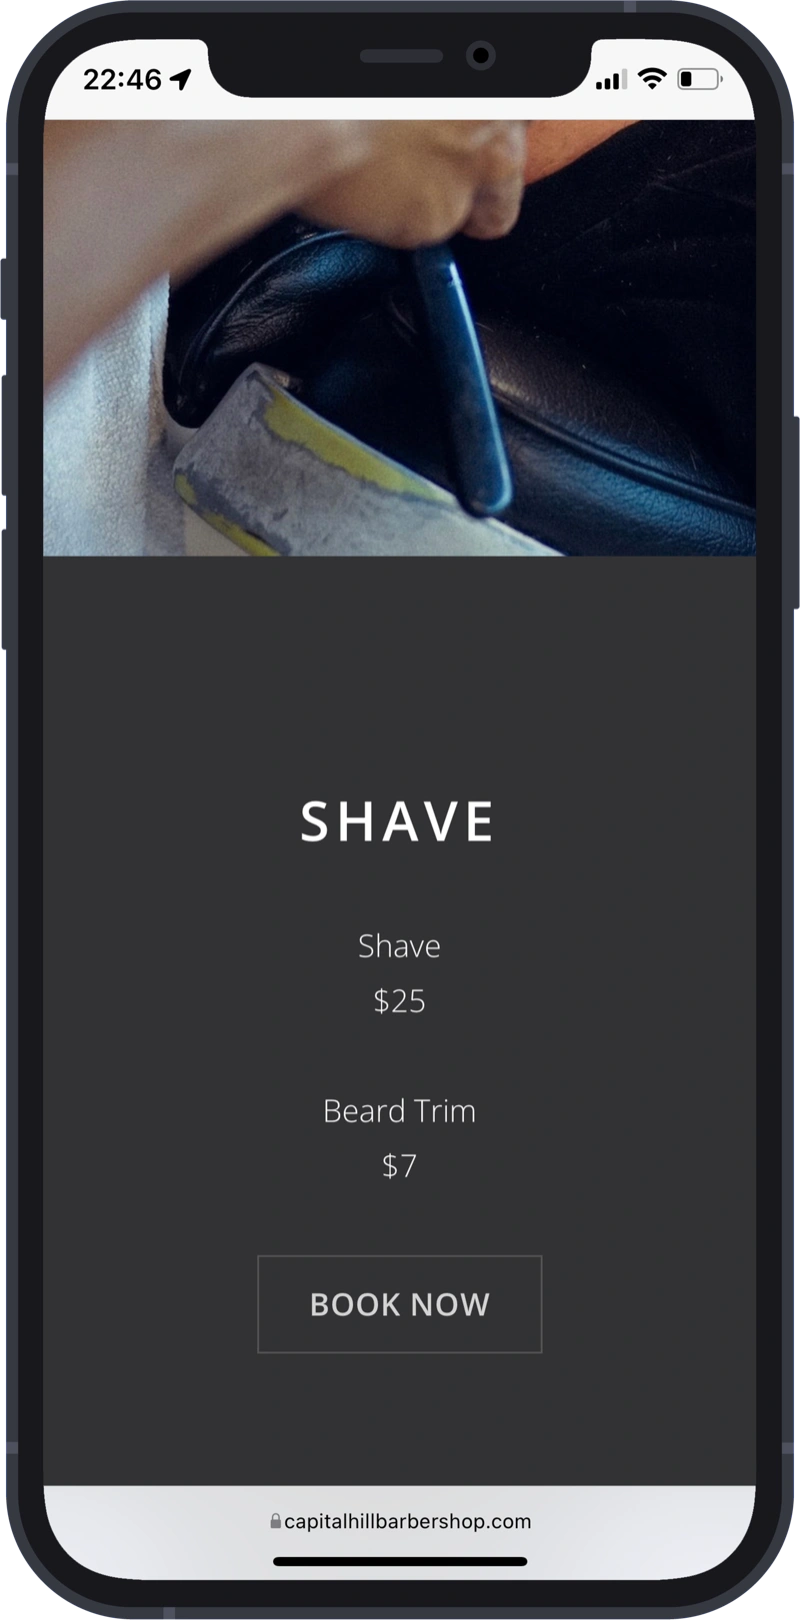 capital hill barbershop website shave section on mobile device